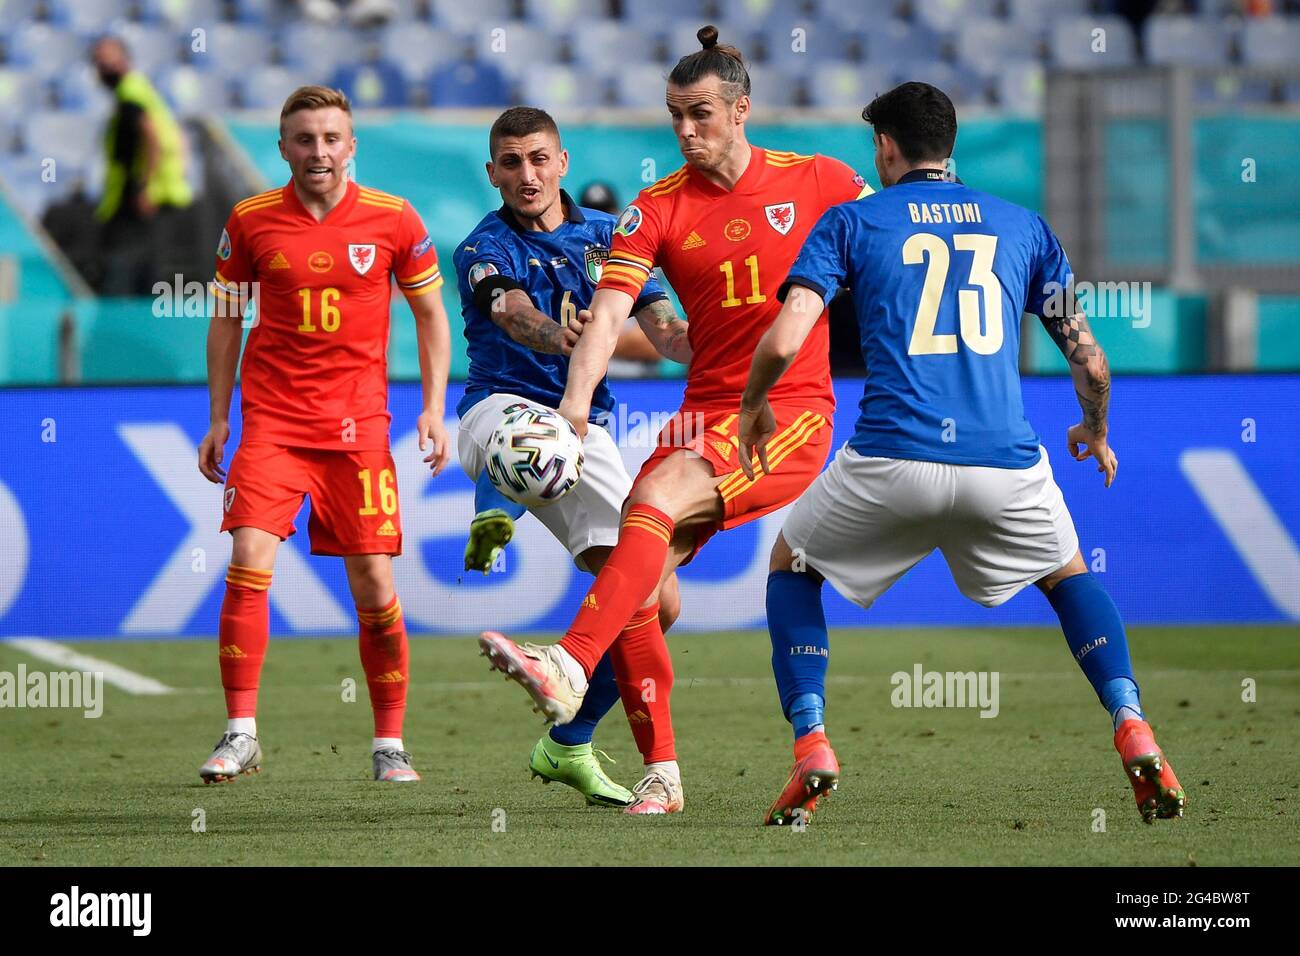 Roma, Italy. 20th June, 2021. Joseff Morrell of Wales, Marco Verratti of Italy, Gareth Bale of Wales and Alessandro Bastoni of Italy compete for the ball during the Uefa Euro 2020 Group A football match between Italy and Wales at stadio Olimpico in Rome (Italy), June 20th, 2021. Photo Andrea Staccioli/Insidefoto Credit: insidefoto srl/Alamy Live News Stock Photo